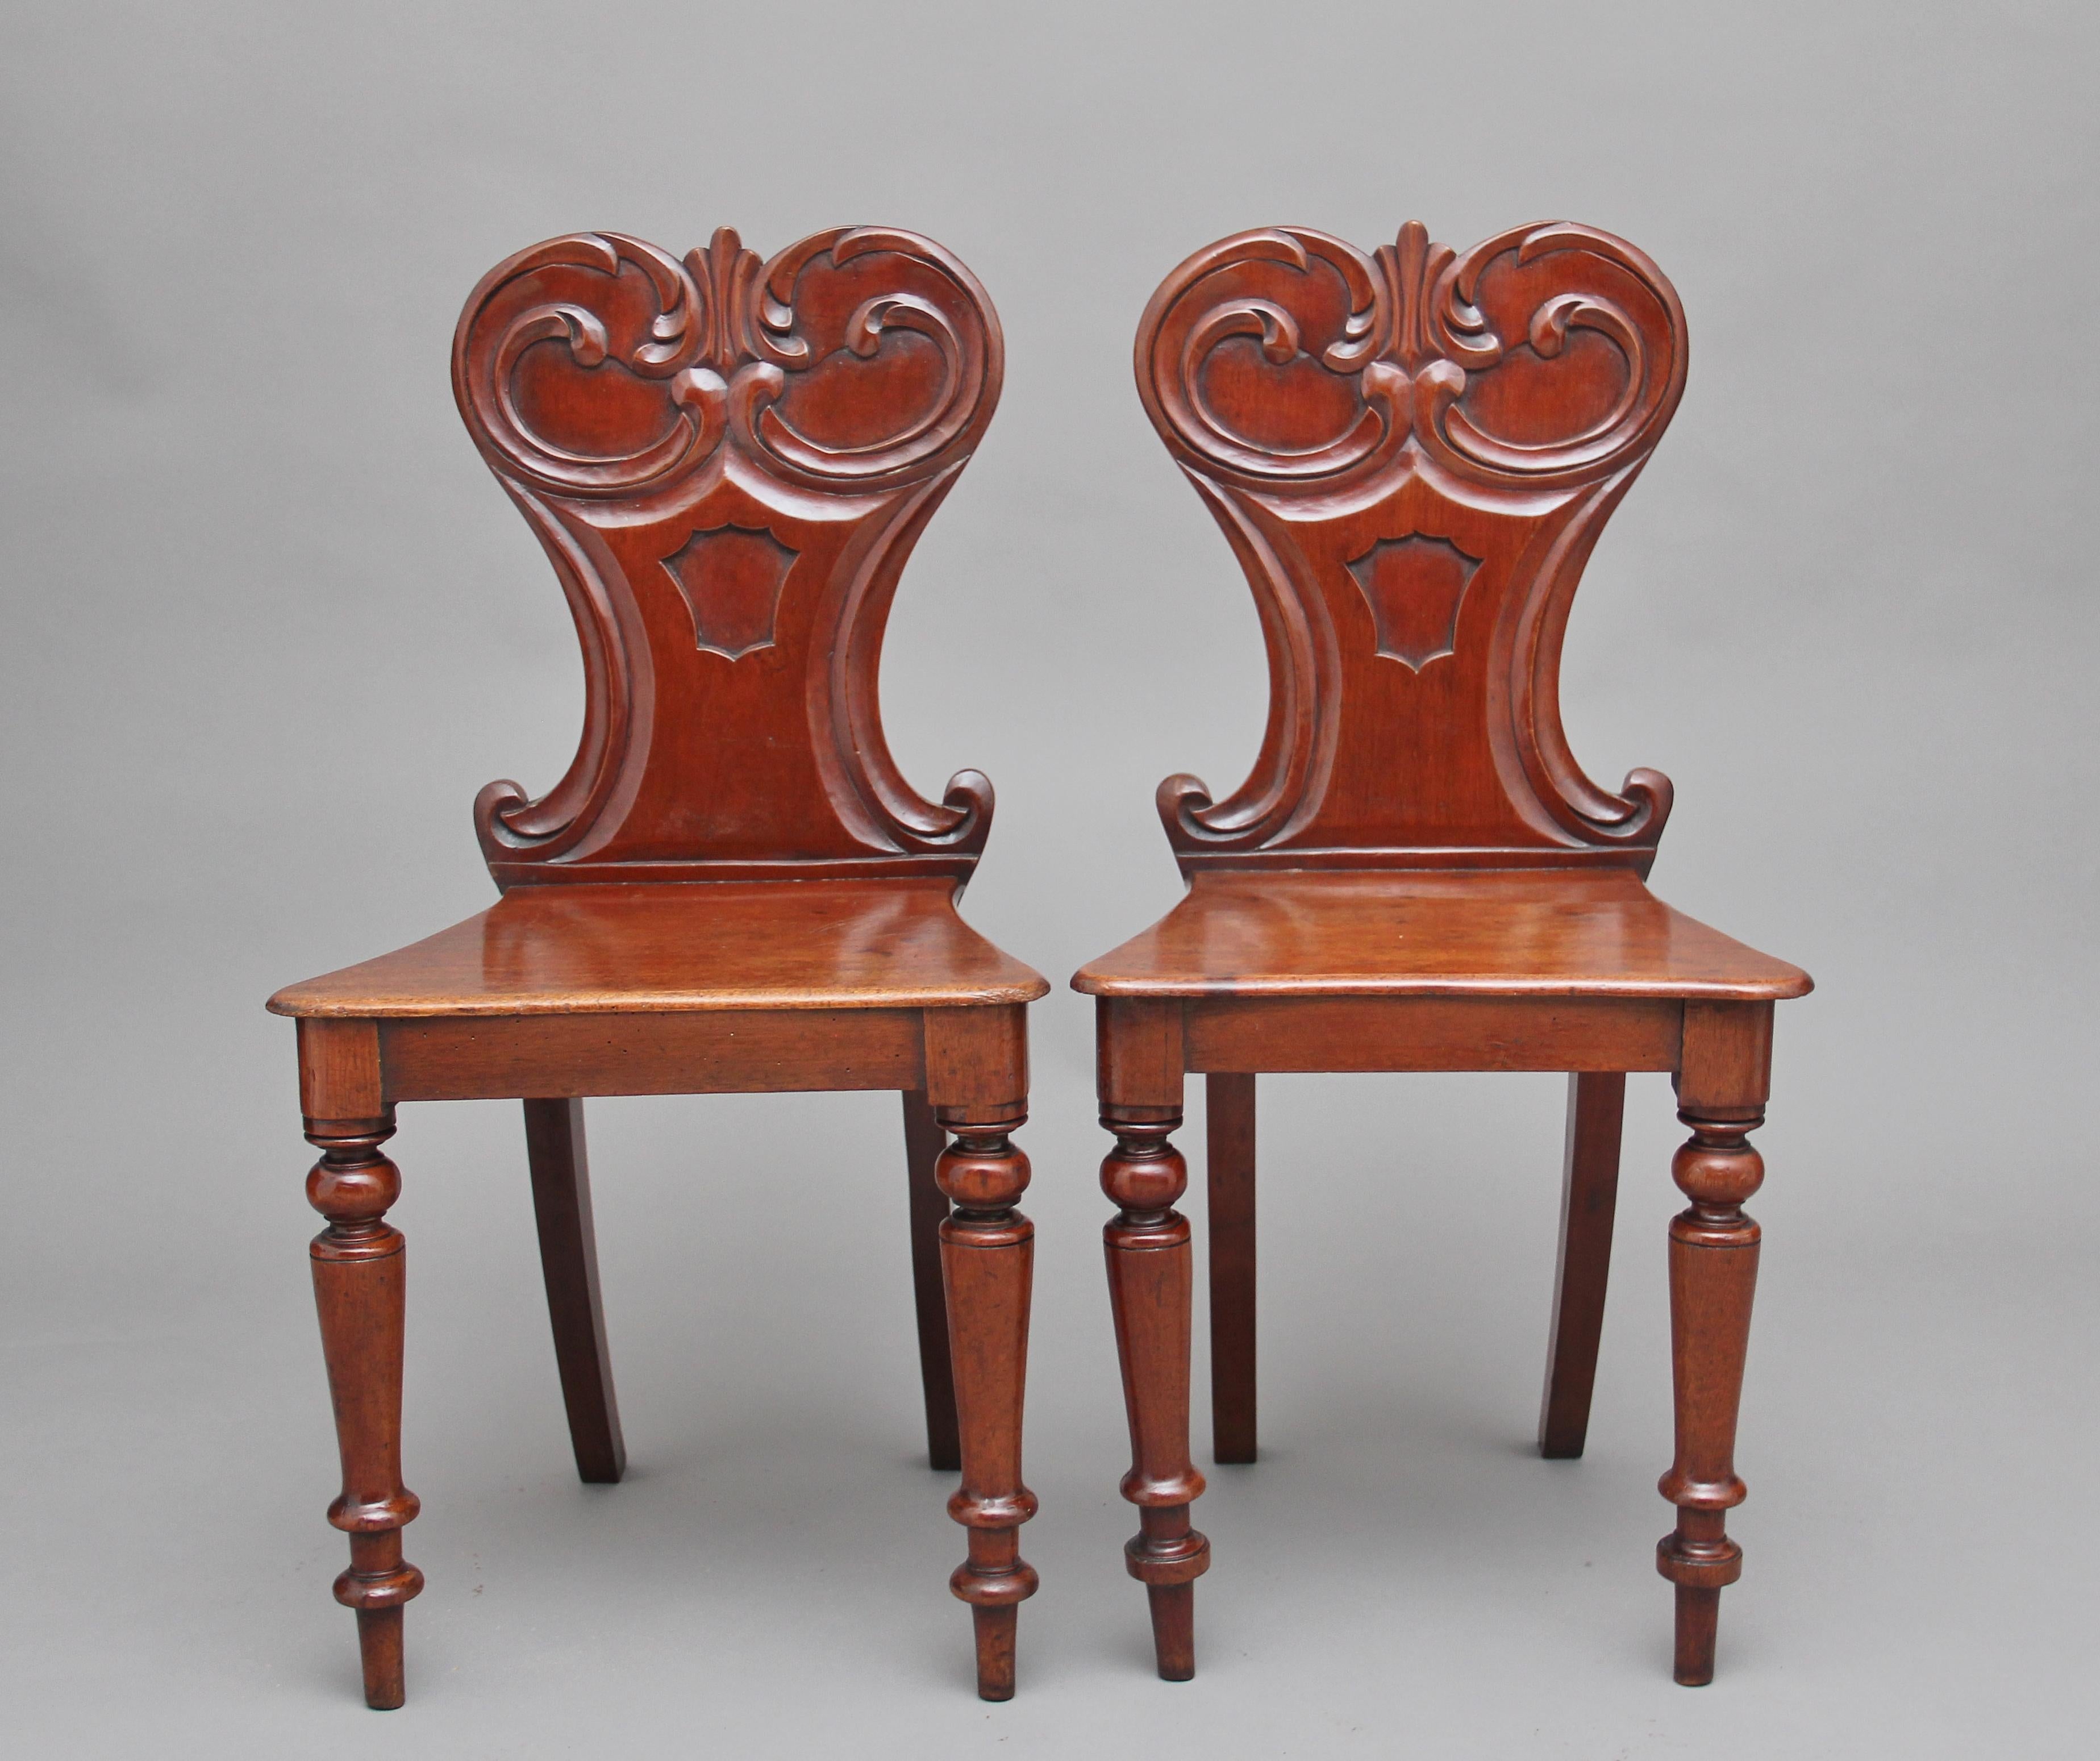 A pair of mid-19th century mahogany hall chairs, having shaped backs carved with scrolling acanthus and centred by shield reserves, supported on out swept rear legs and turned front legs, circa 1840.